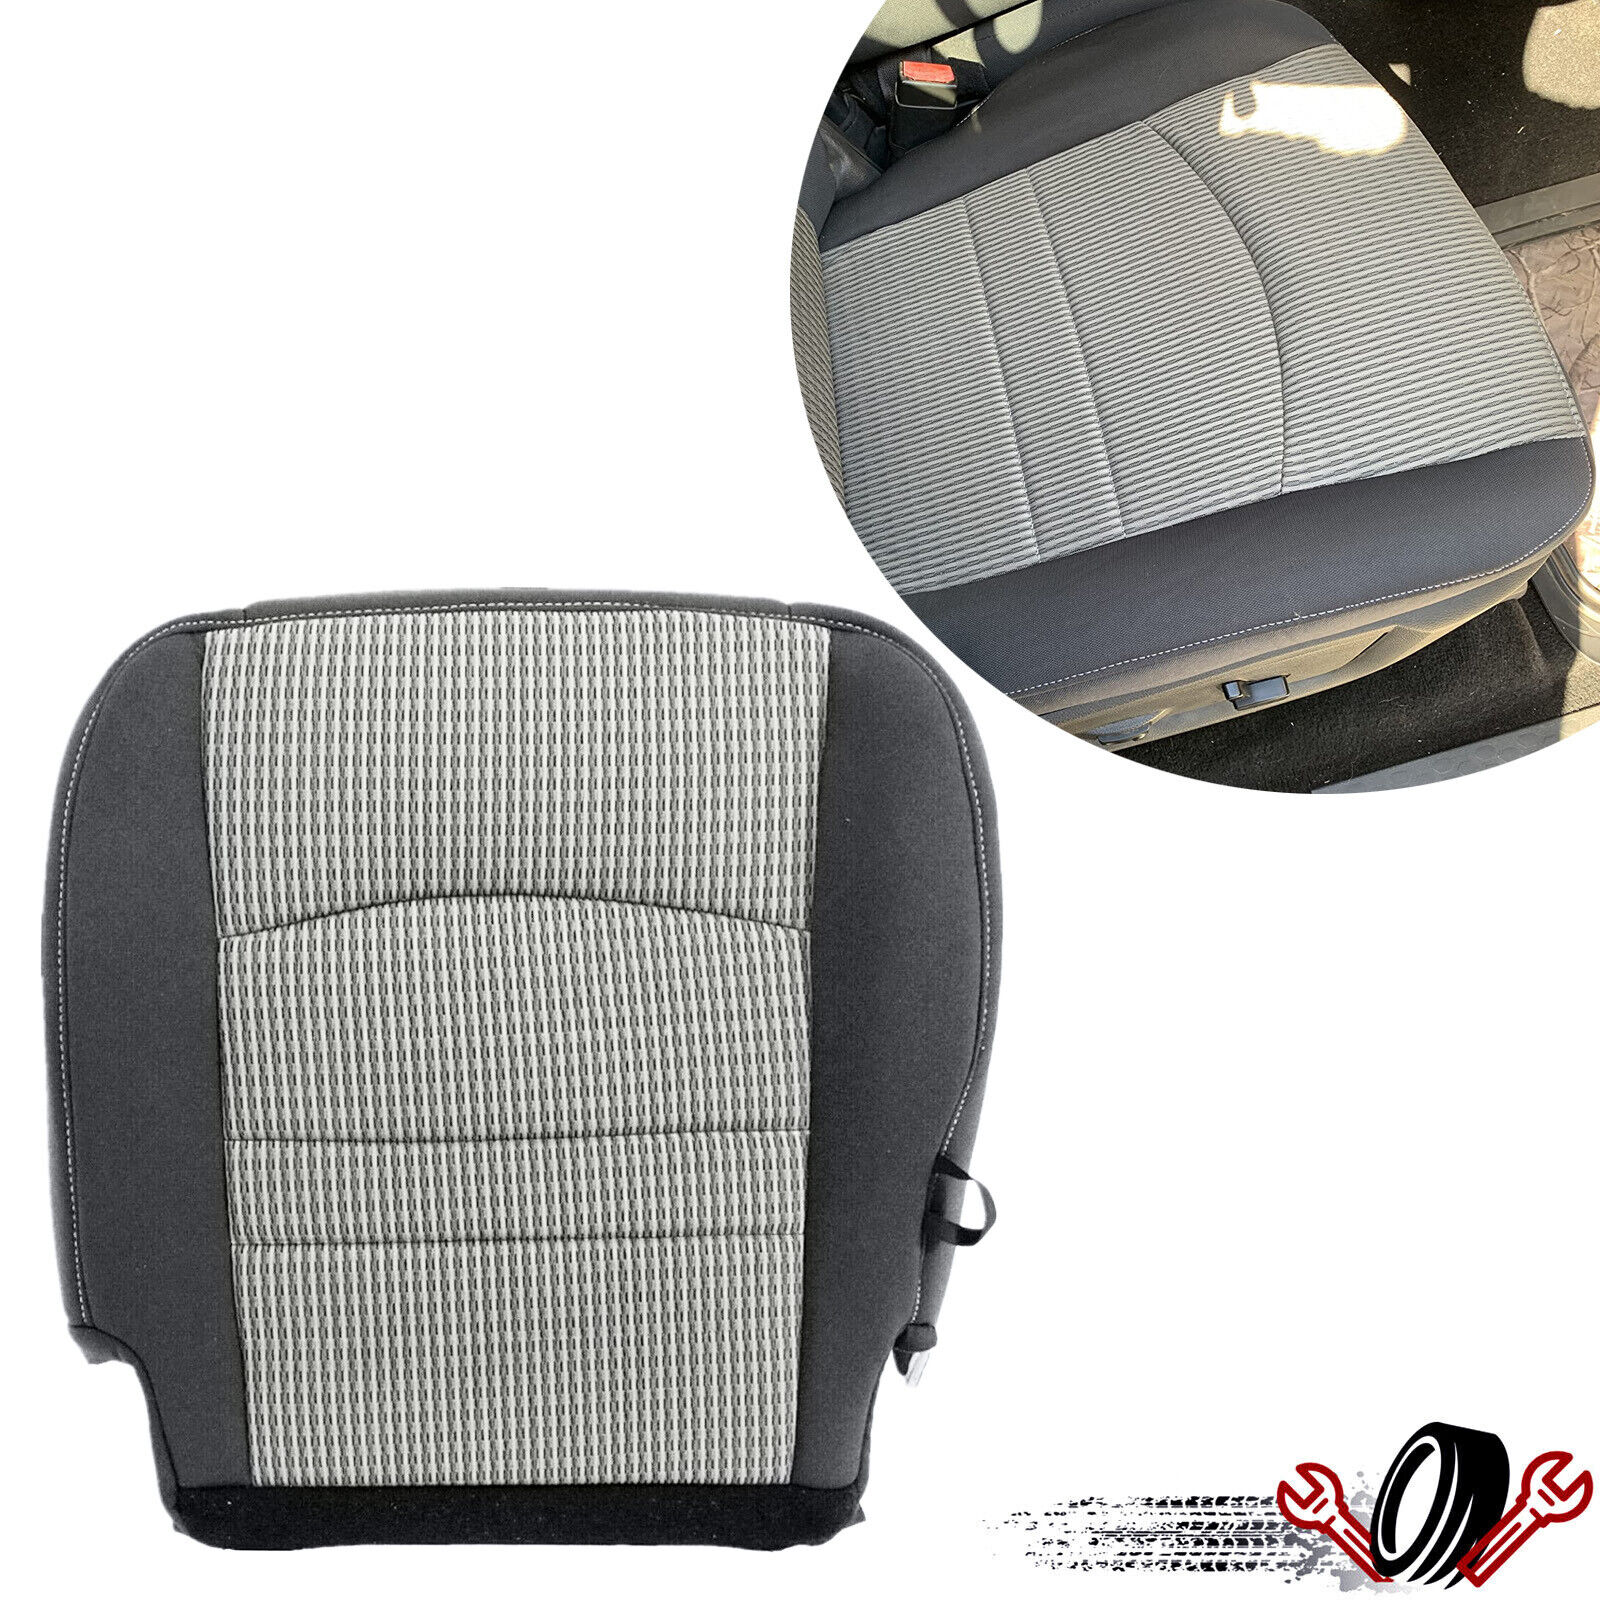 For 2009 2010 2011 2012 Dodge Ram 1500 2500 3500 Driver Bottom Cloth Seat Cover